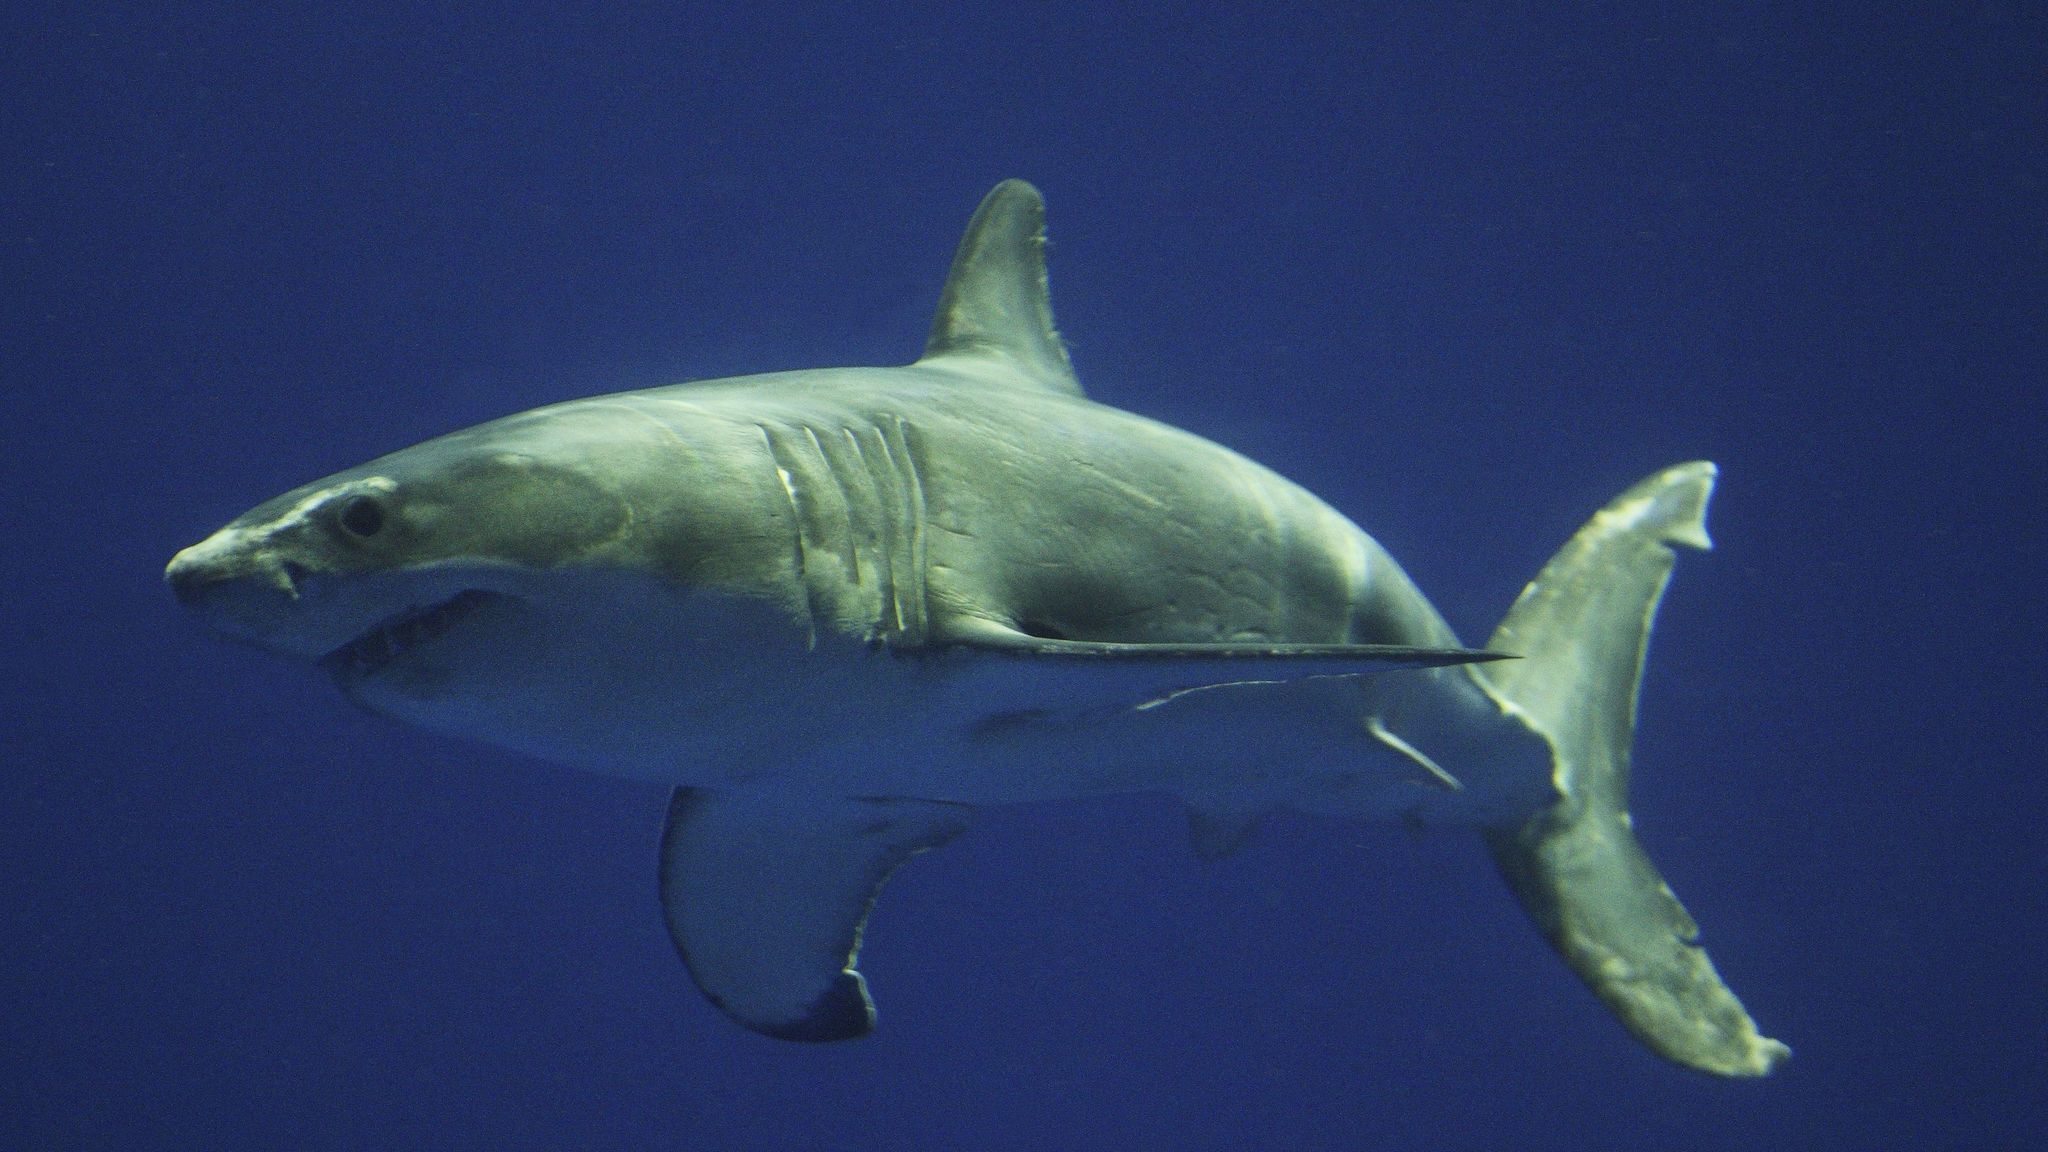 Shark sighting prompts new beach closure in San Clemente